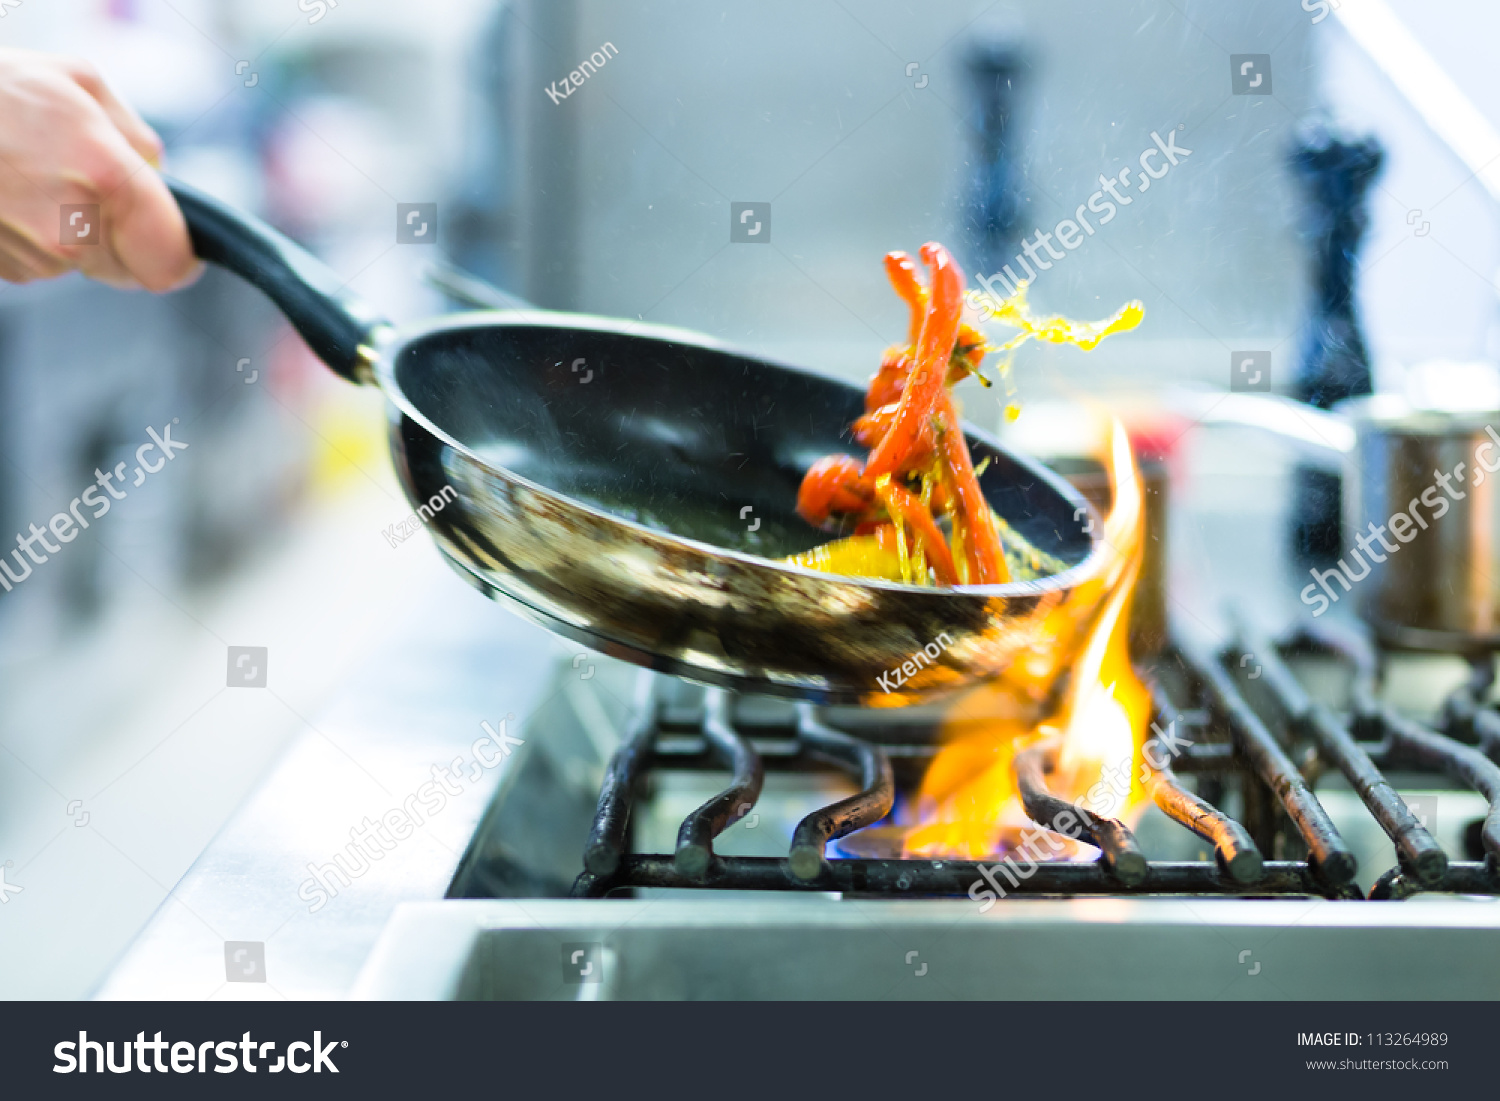 Chef in restaurant kitchen at stove with pan, doing flambe on food #113264989